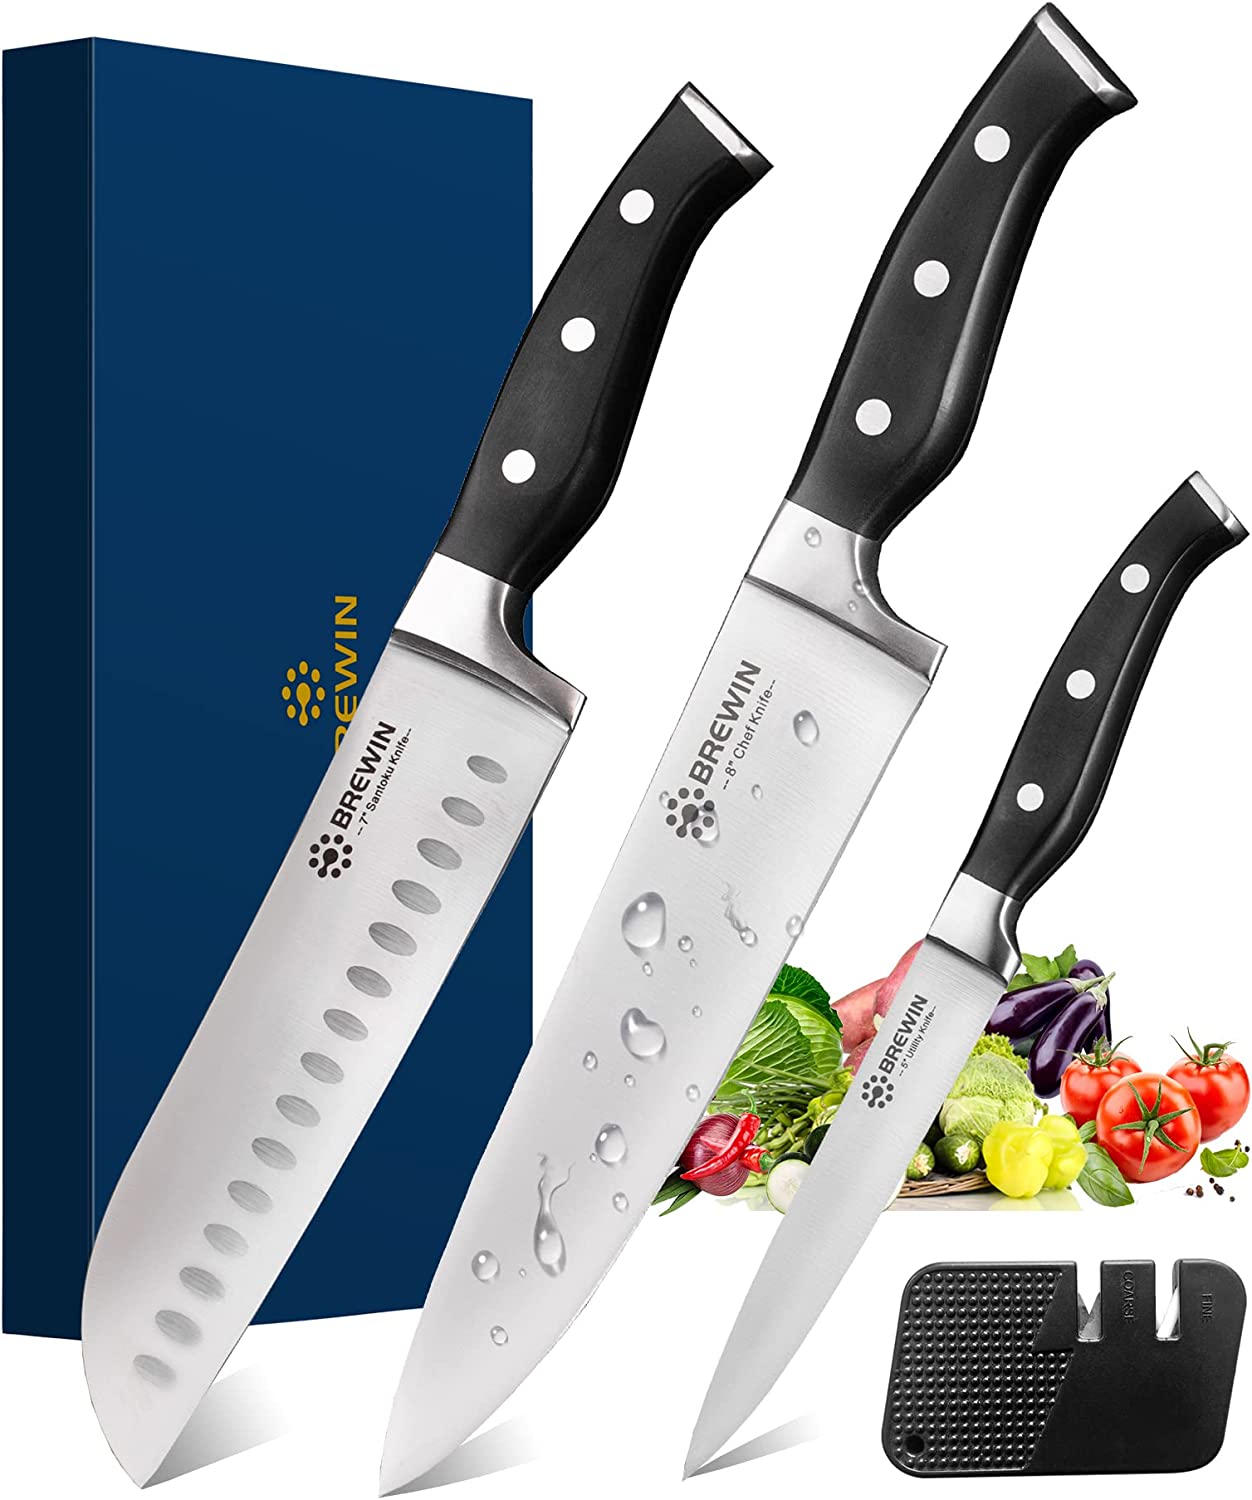 Marco Almond Kitchen Knife Set, KYA38 12-Piece Kitchen Knives Set with  Covers, 6 Knives with 6 Blade Guards, Stainless Steel Cooking Knives Set  for